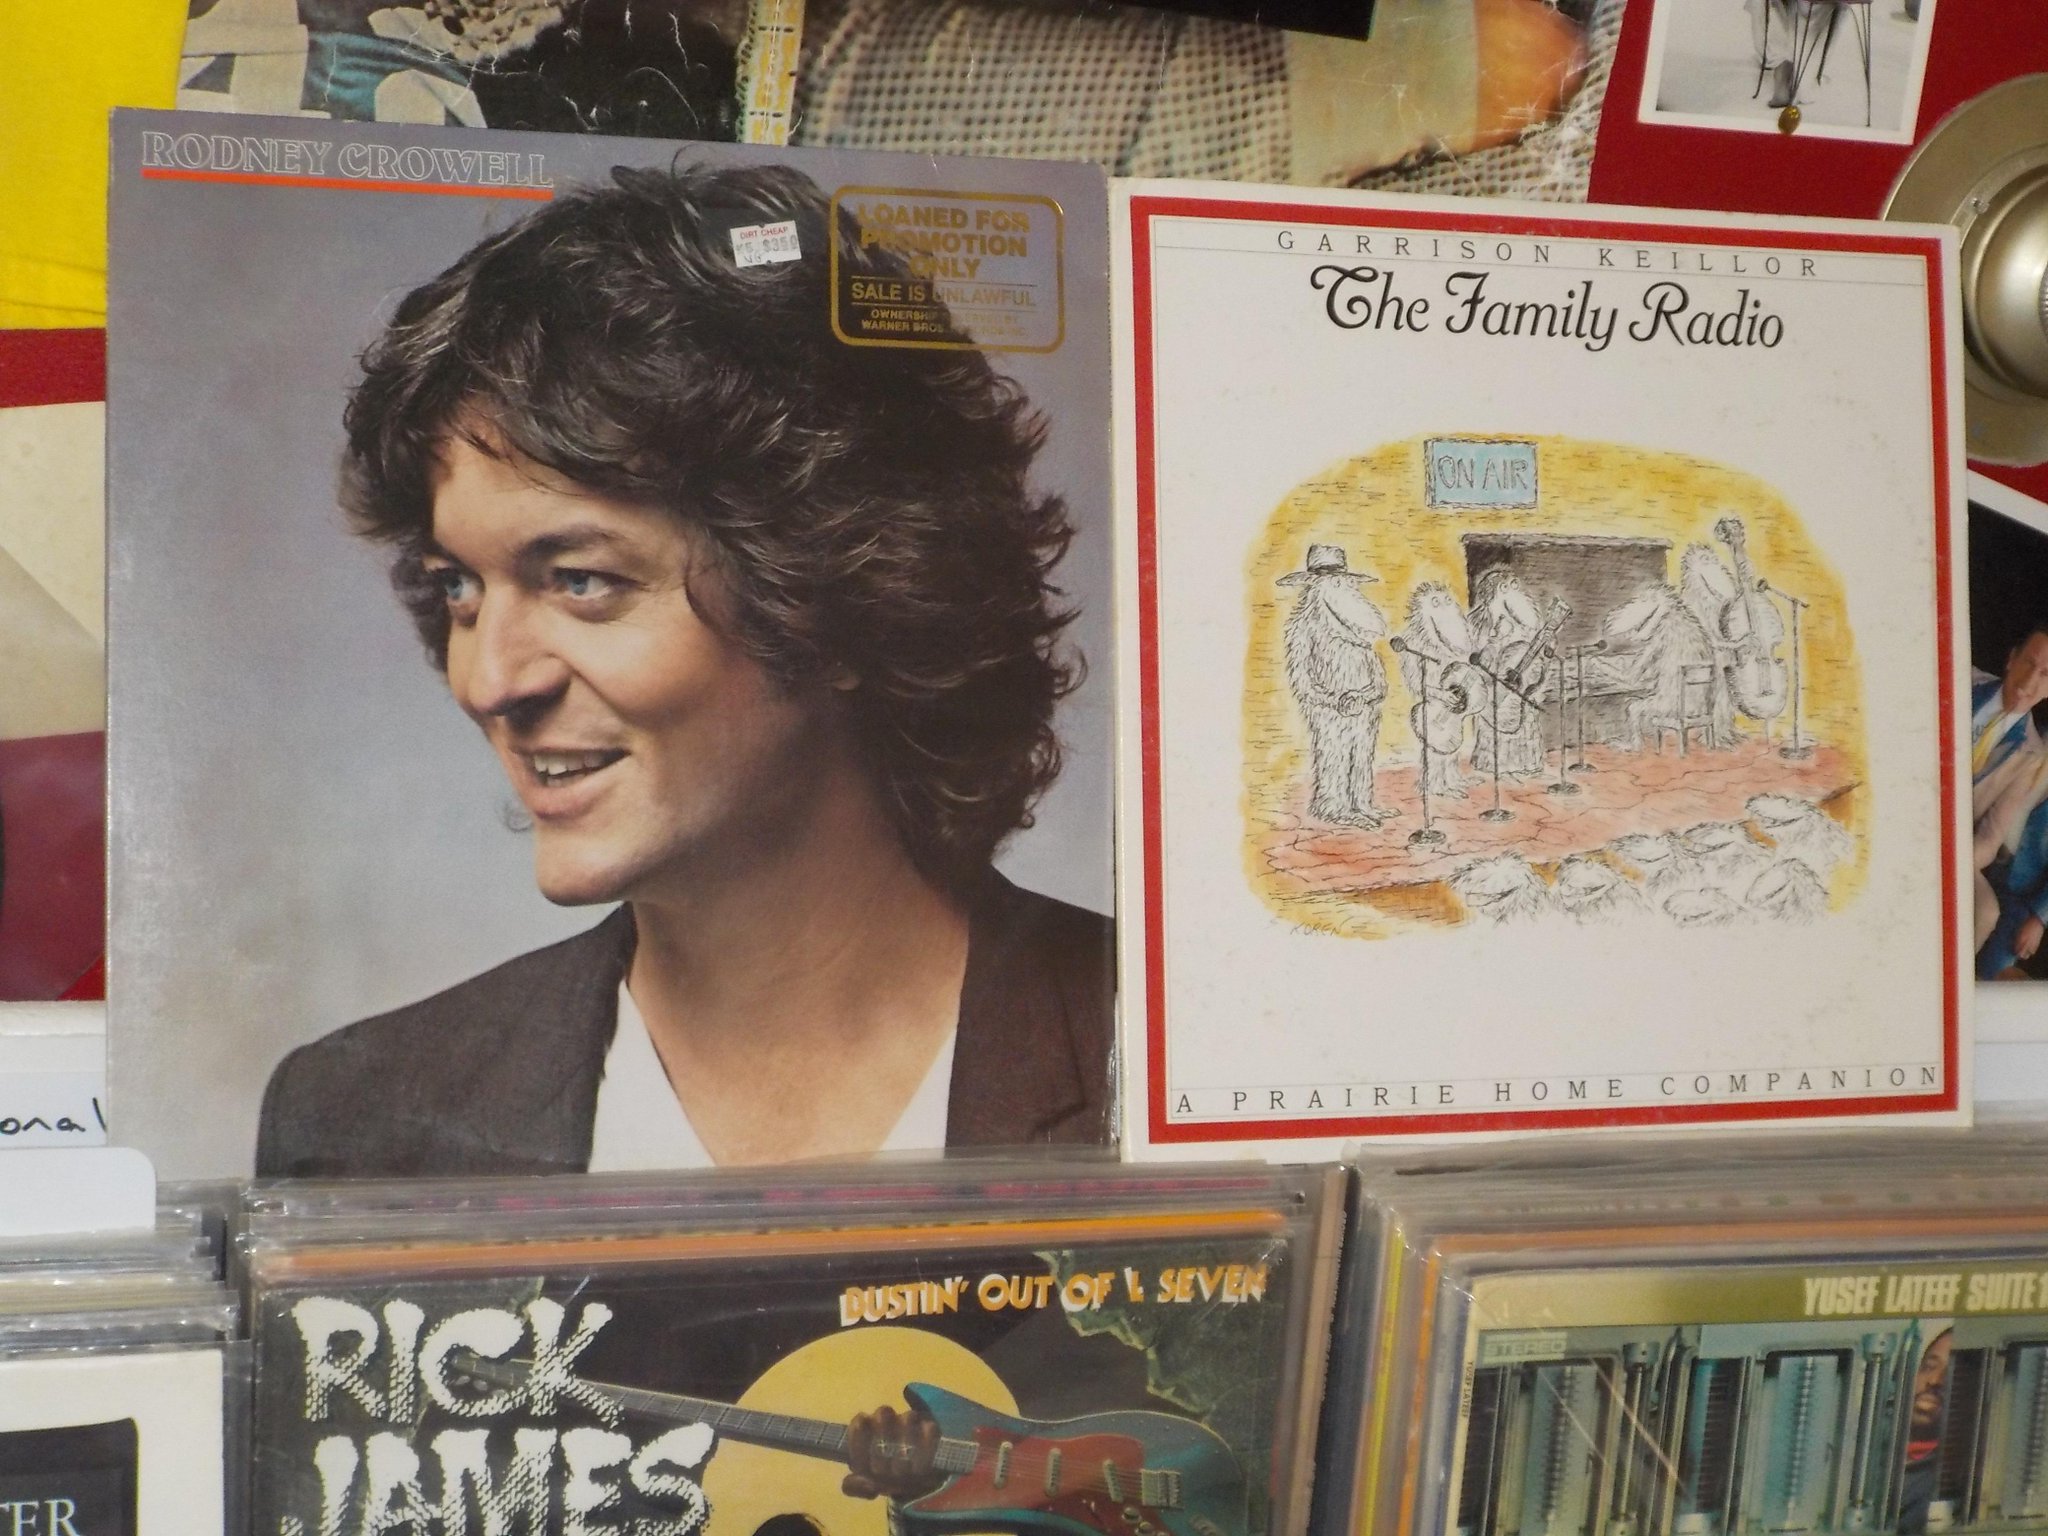 Happy Birthday to Rodney Crowell and Garrison Keillor 